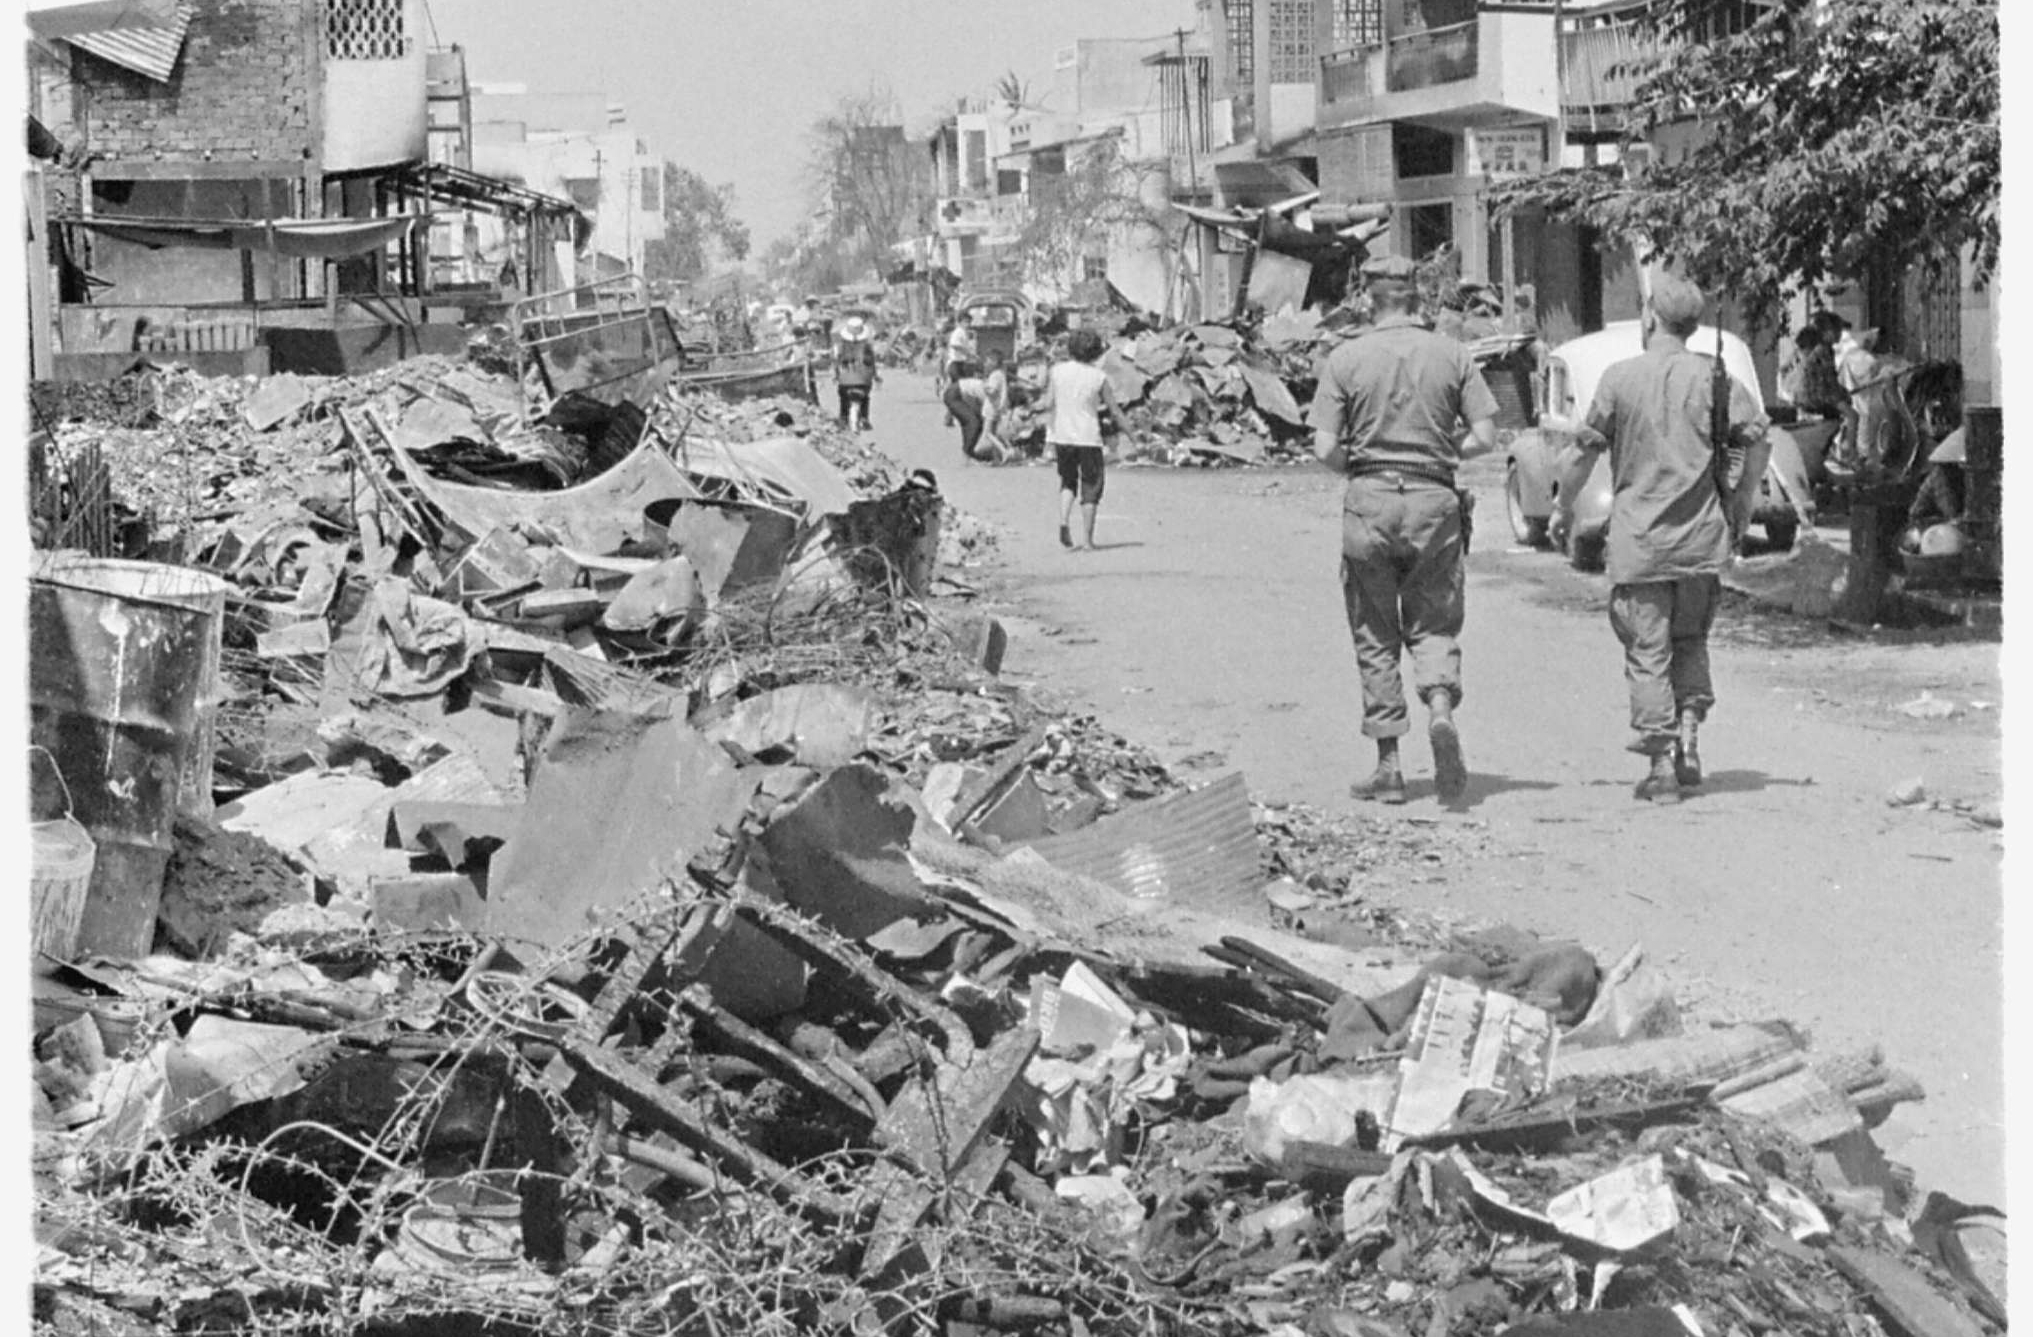 Suburb of Saigon That was Burned by the South Vietnamese Army